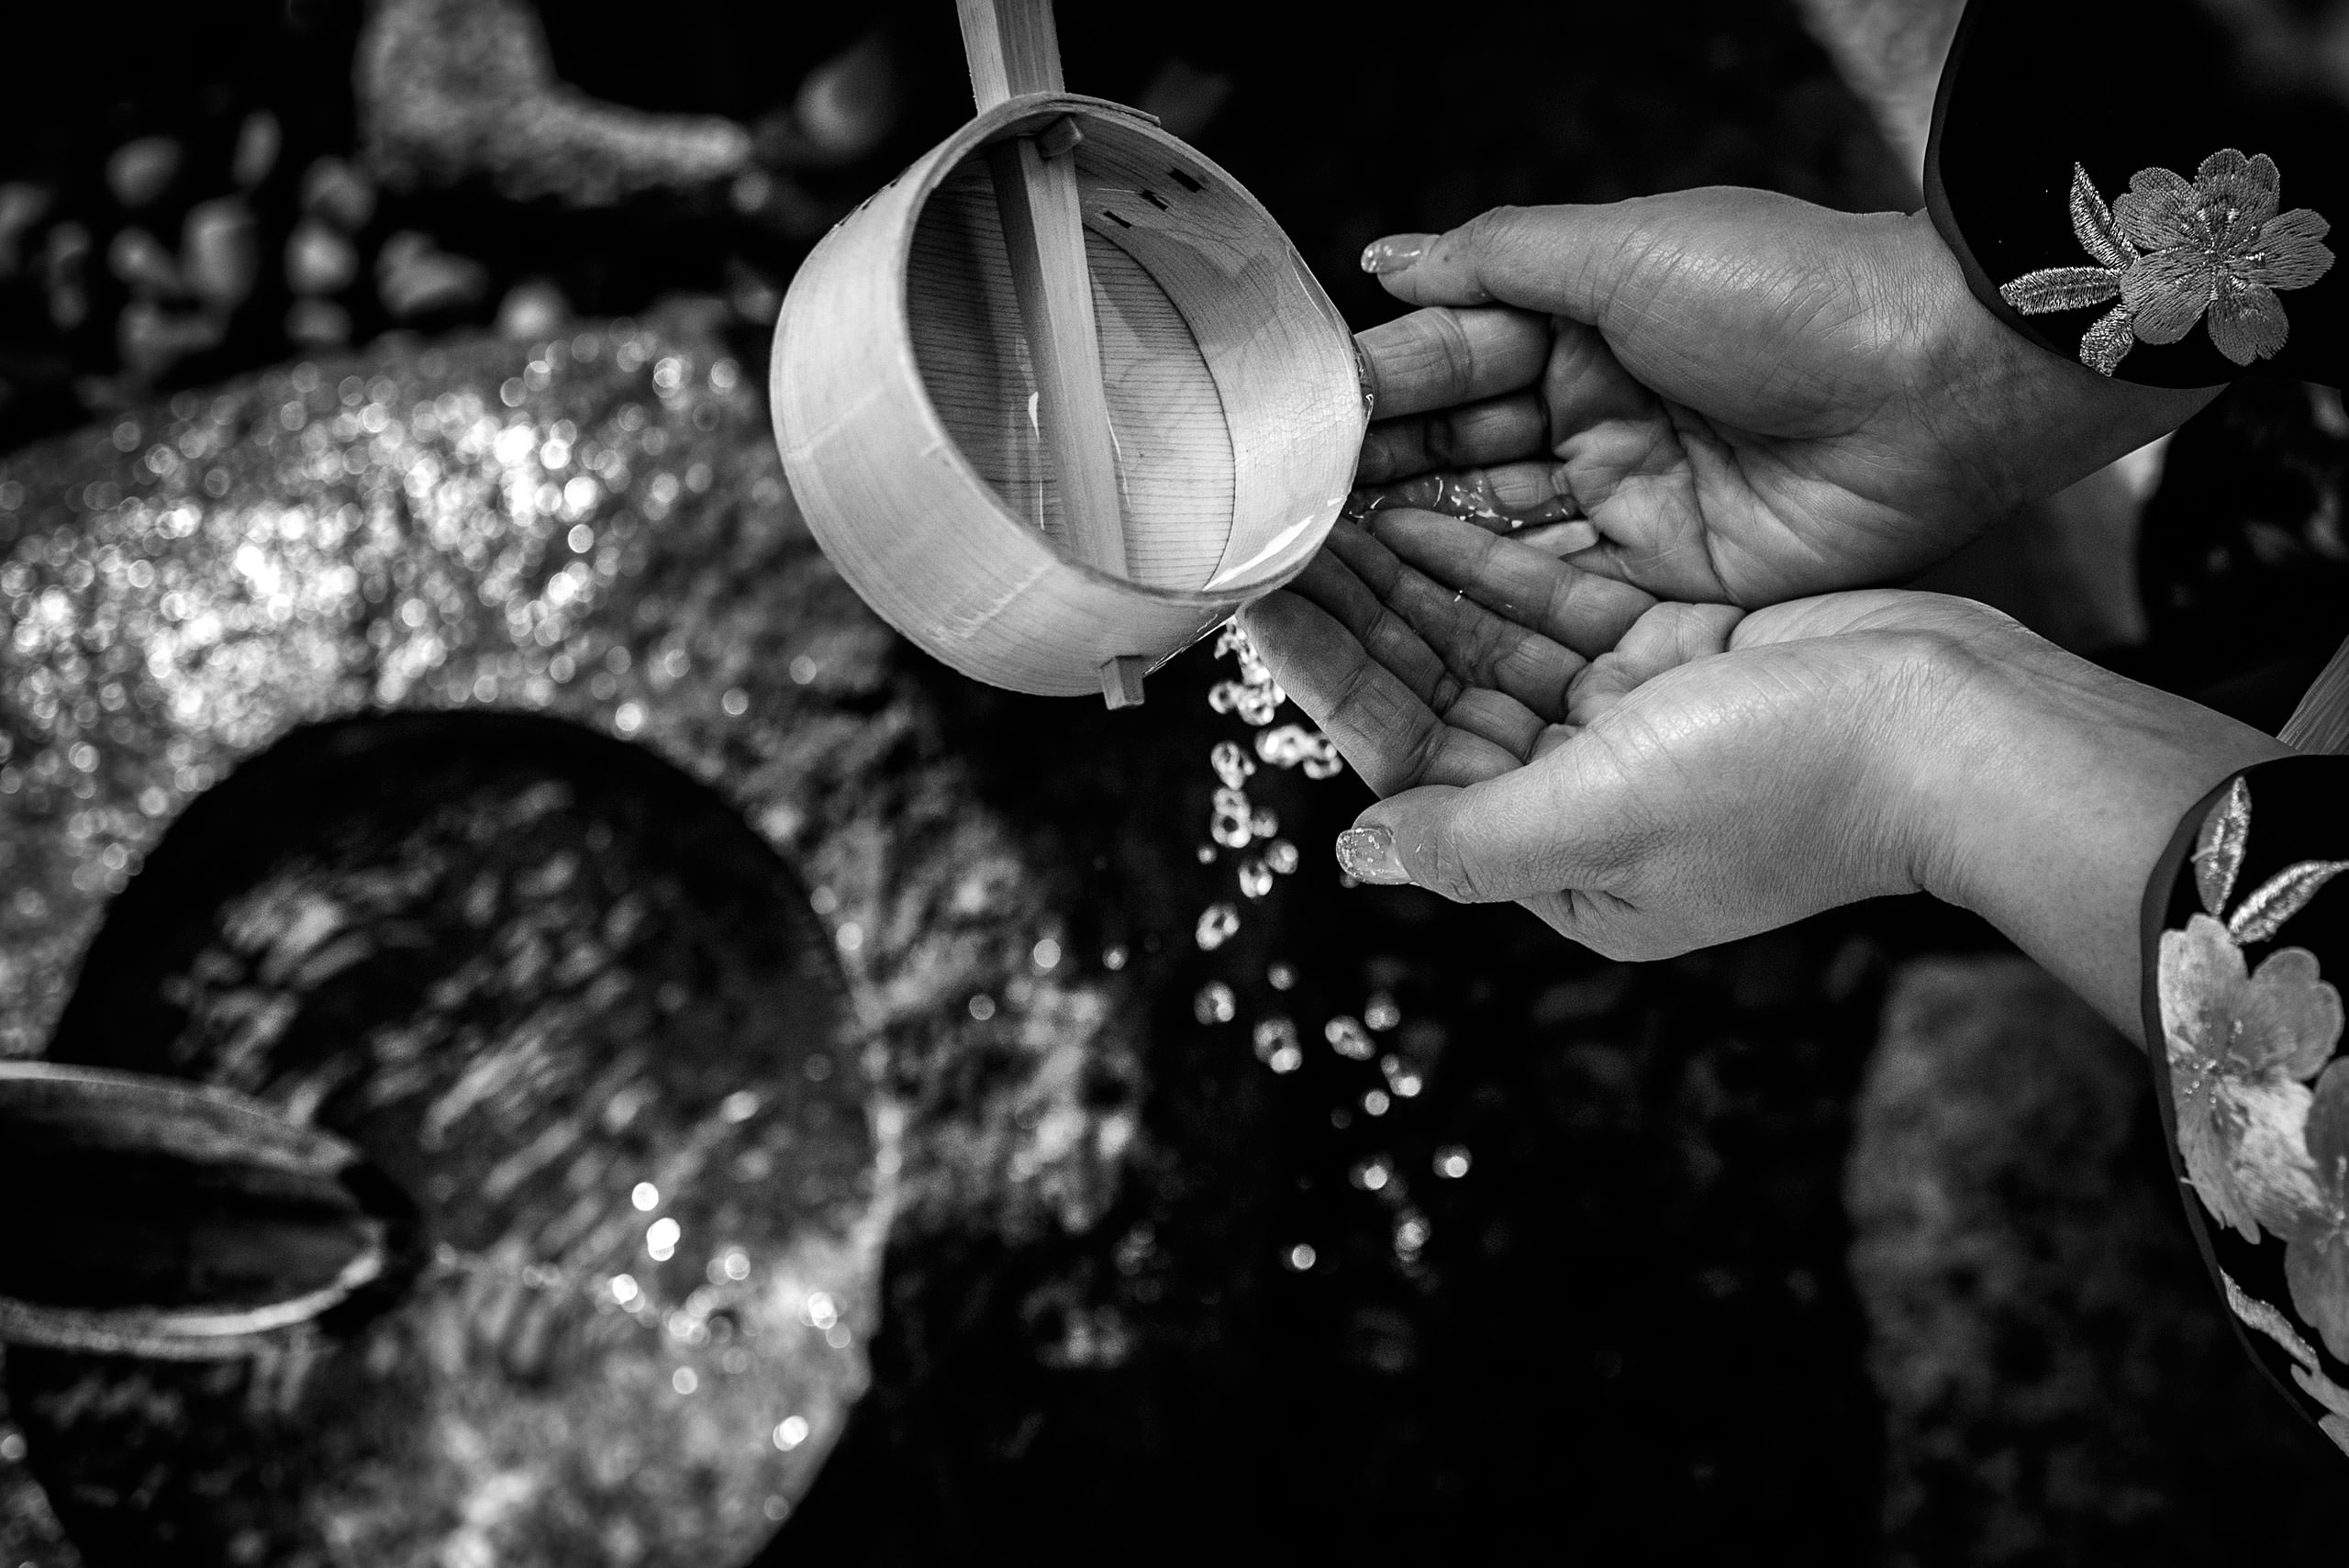 water being poured over hands by Japan Destination Wedding Photographer Sean LeBlanc